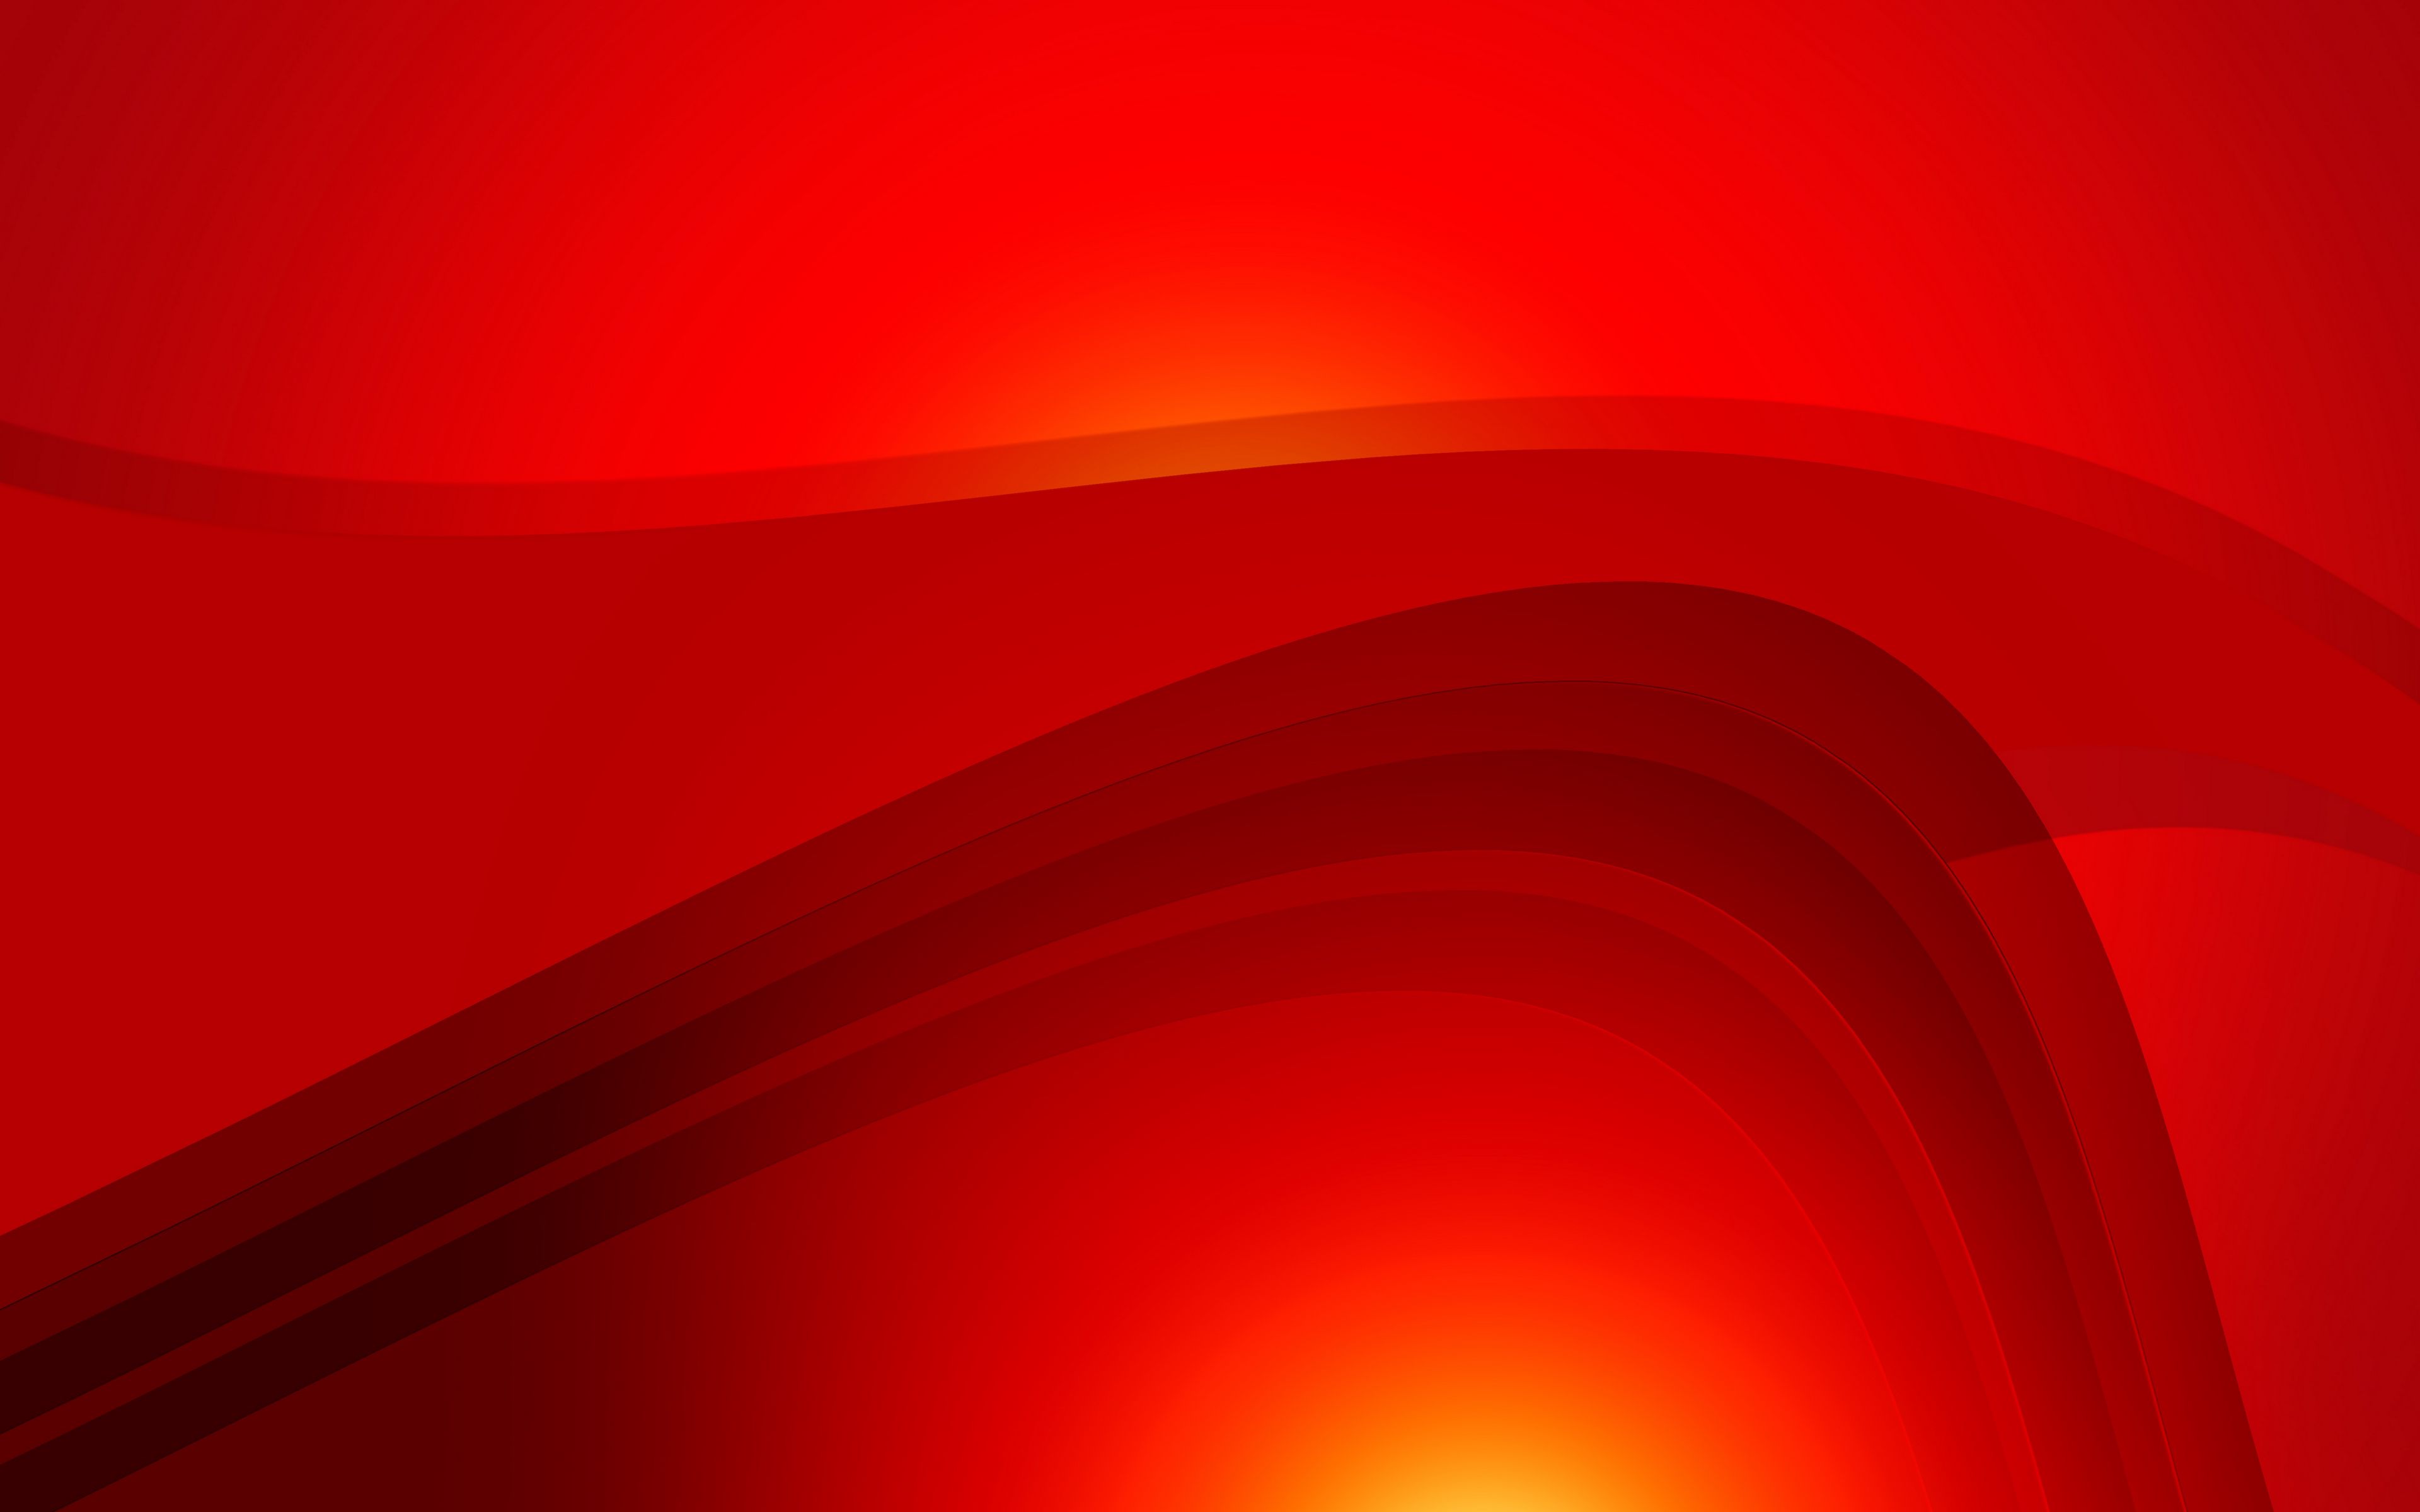 Download Wallpaper 3840x2400 Abstraction Waves Lines Red 4k Ultra Hd 16 10 Hd Background